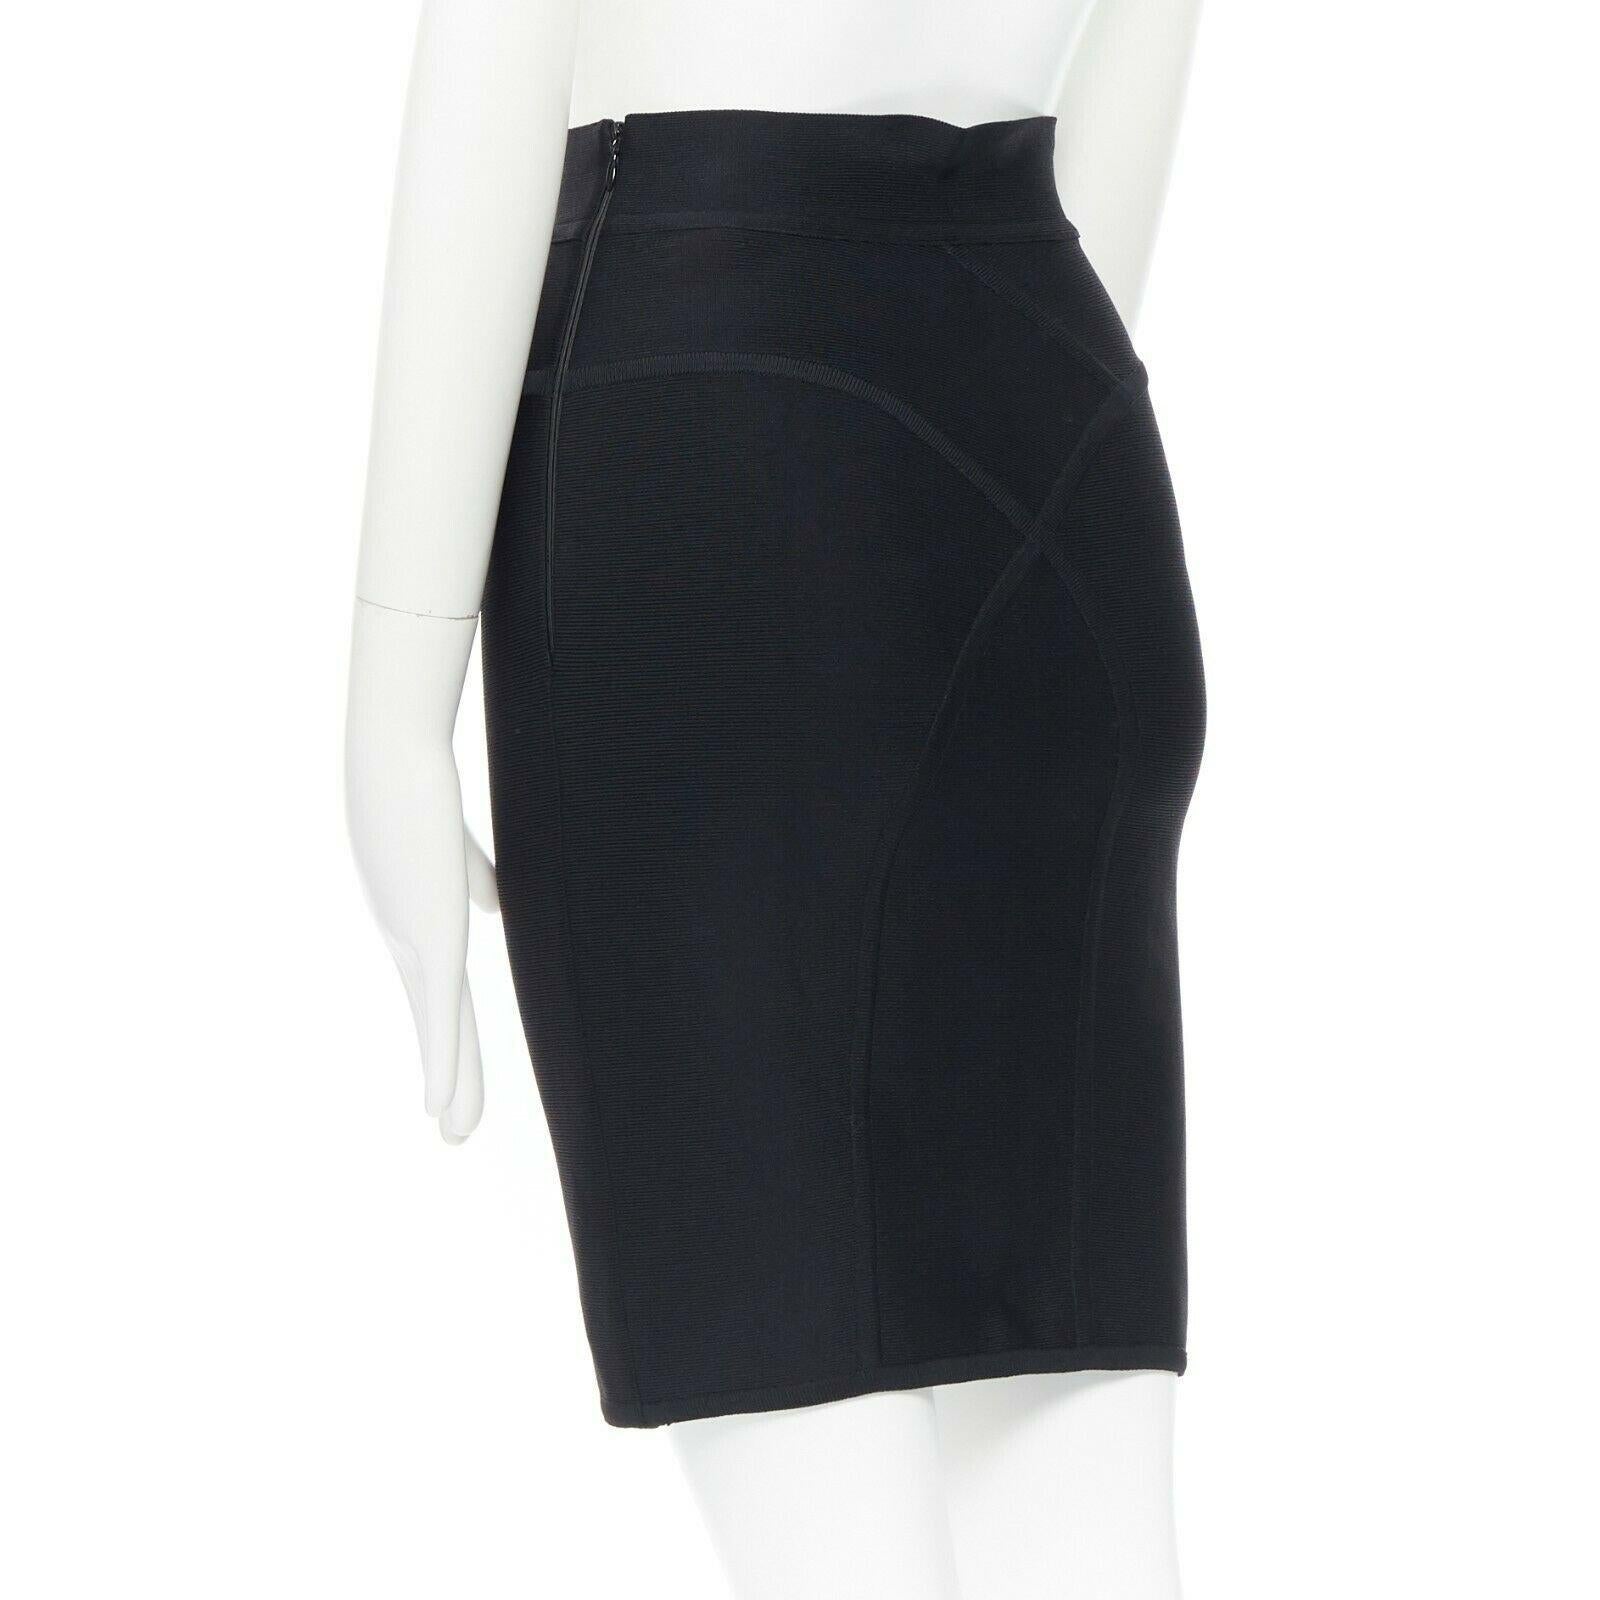 HERVE LEGER PARIS black body-conscious stretchable piping bandage pencil skirt S 
Reference: LNKO/A01178 
Brand: Herve Leger 
Material: Viscose 
Color: Black 
Closure: Zip 
Extra Detail: Bandage pencil skirt. Body defined piping. Stretchable fabric.